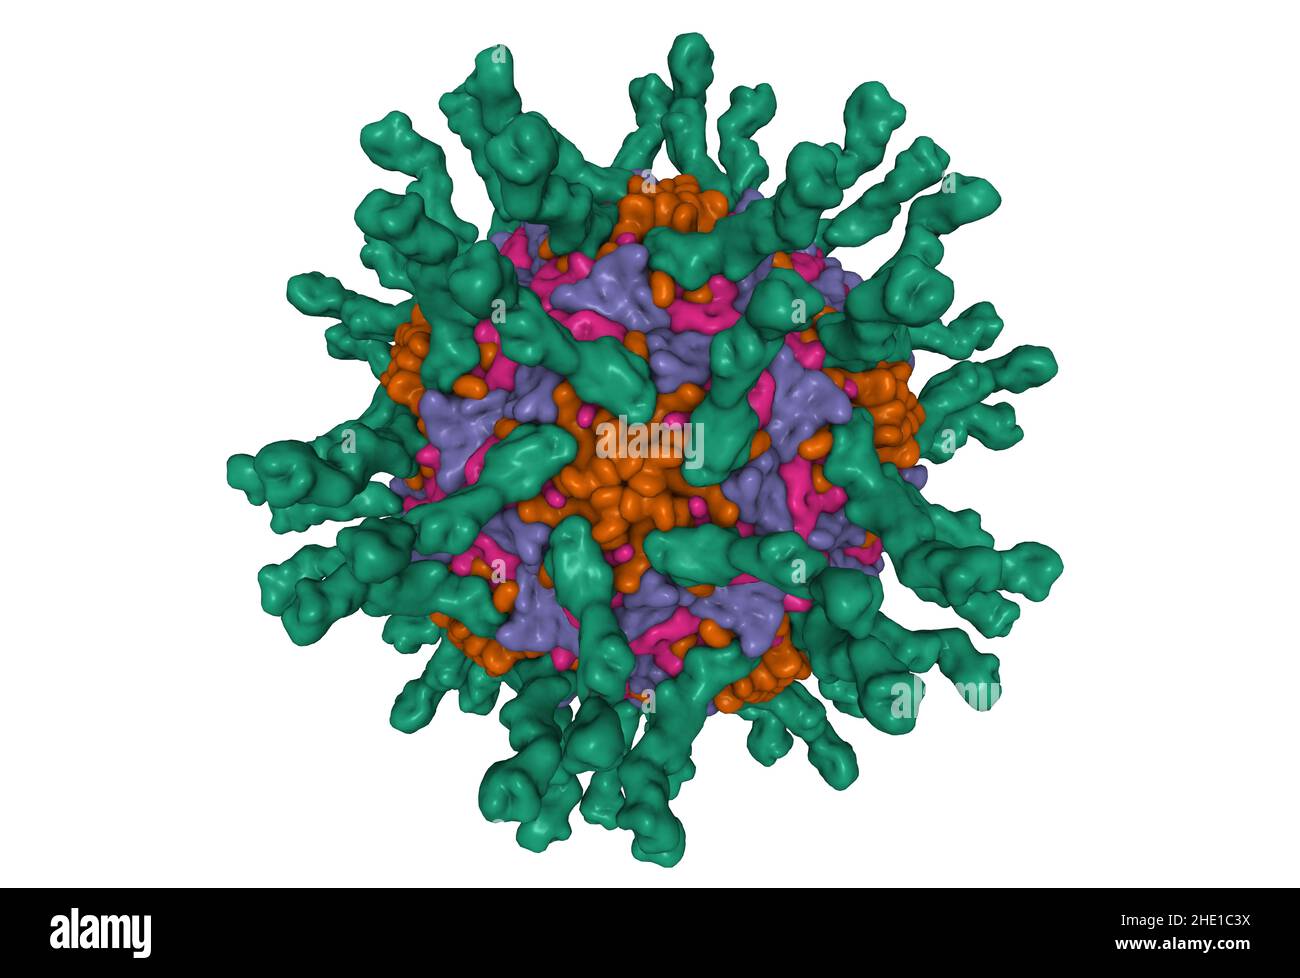 Cryo-EM structure of human poliovirus(serotype 1)complexed with three domain CD155 (green). 3D Gaussian surface model, PDB 1dgi, white background Stock Photo